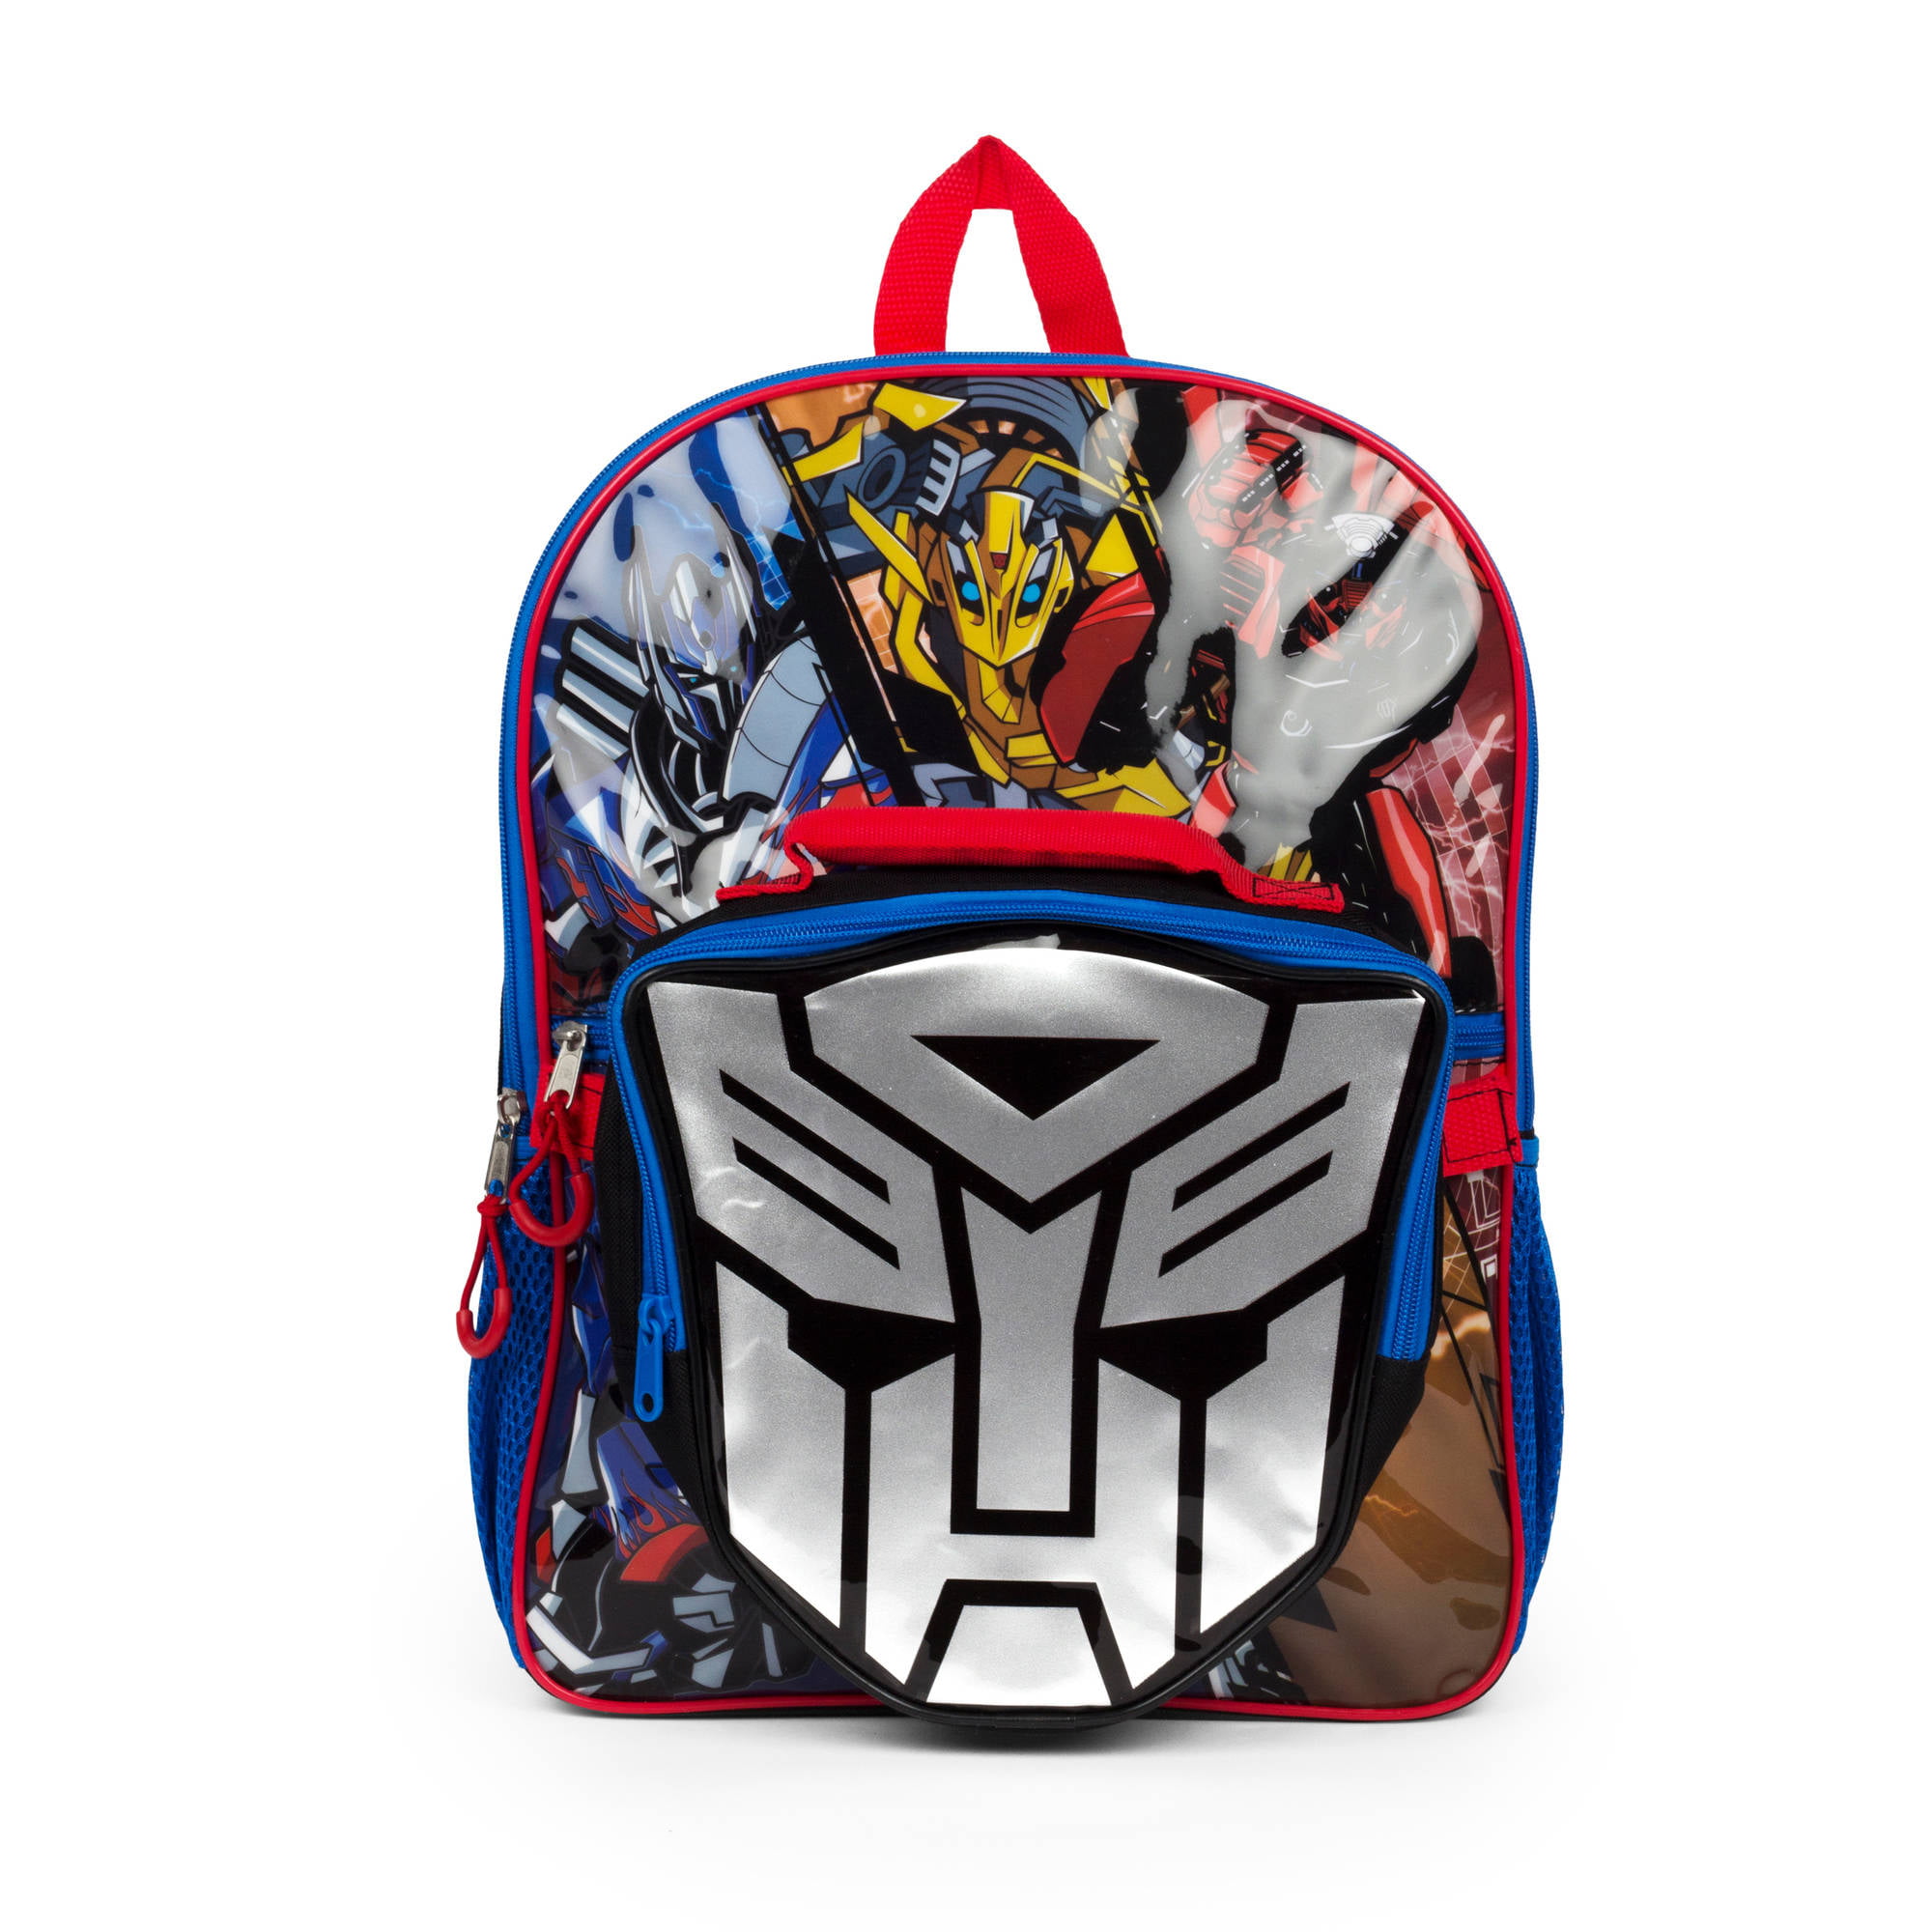 Screen Legends Transformers Backpack with Lunch Box Set for Boys - Bundle  with 15” Transformers Backpack, Lunch Bag, Water Bottle, Tattoos, More